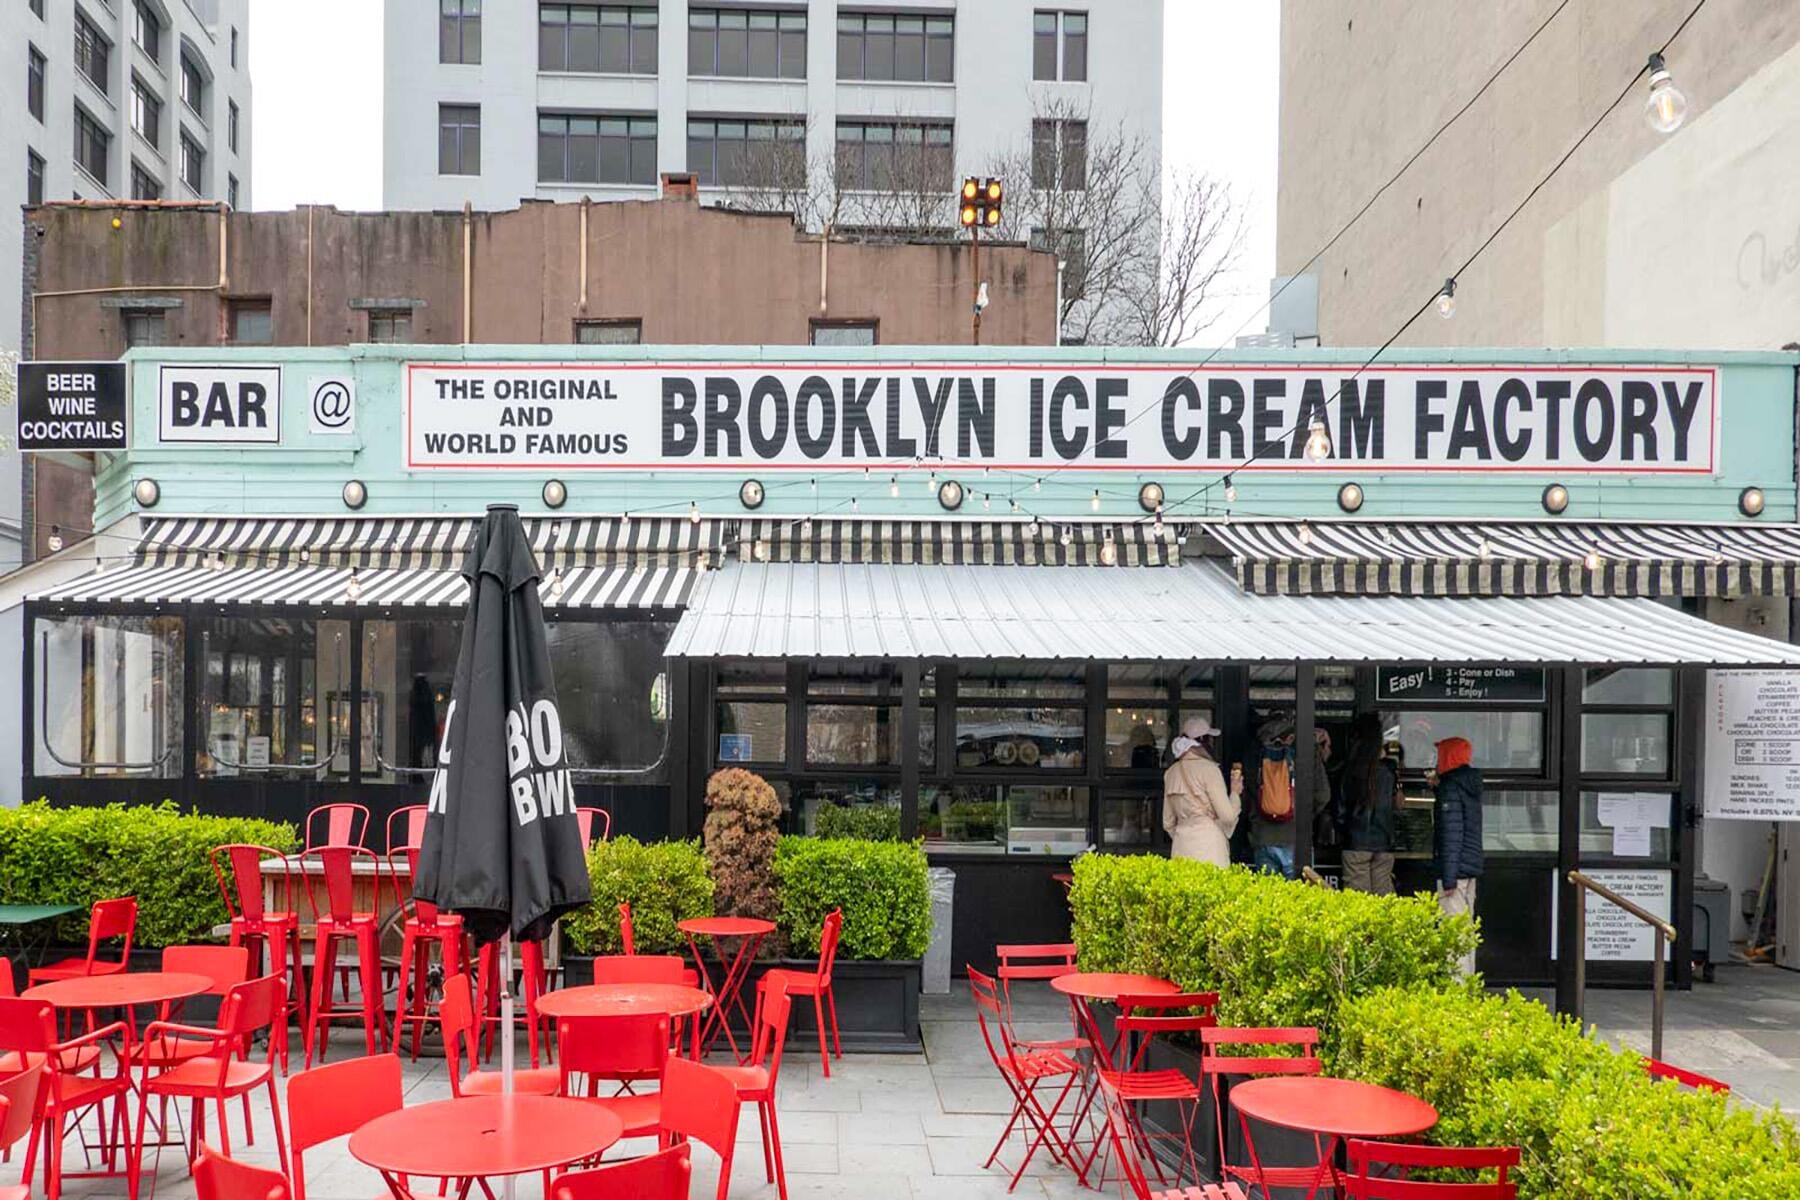 <a href='https://www.fodors.com/world/north-america/usa/new-york/new-york-city/experiences/news/photos/best-places-for-ice-cream-in-new-york-city#'>From &quot;The 12 Best Places for Ice Cream in New York City: Brooklyn Ice Cream Factory&quot;</a>